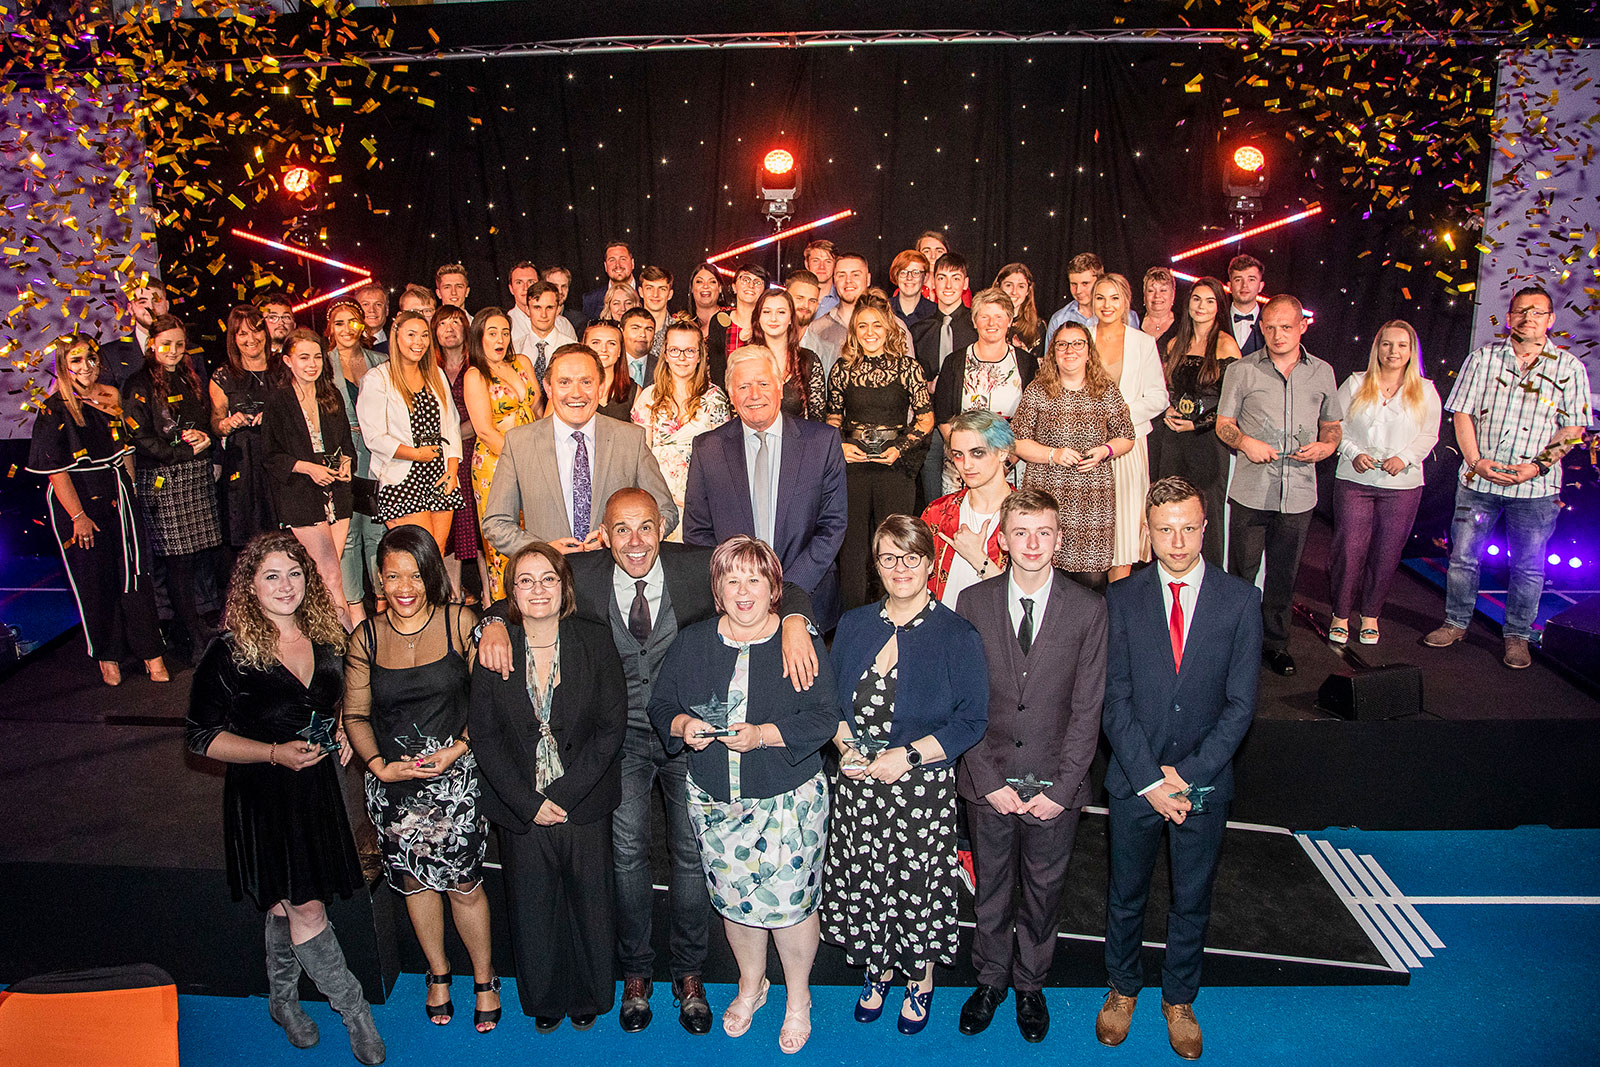 Bbc Star Joins Coleg Cambria For Glittering Student Awards